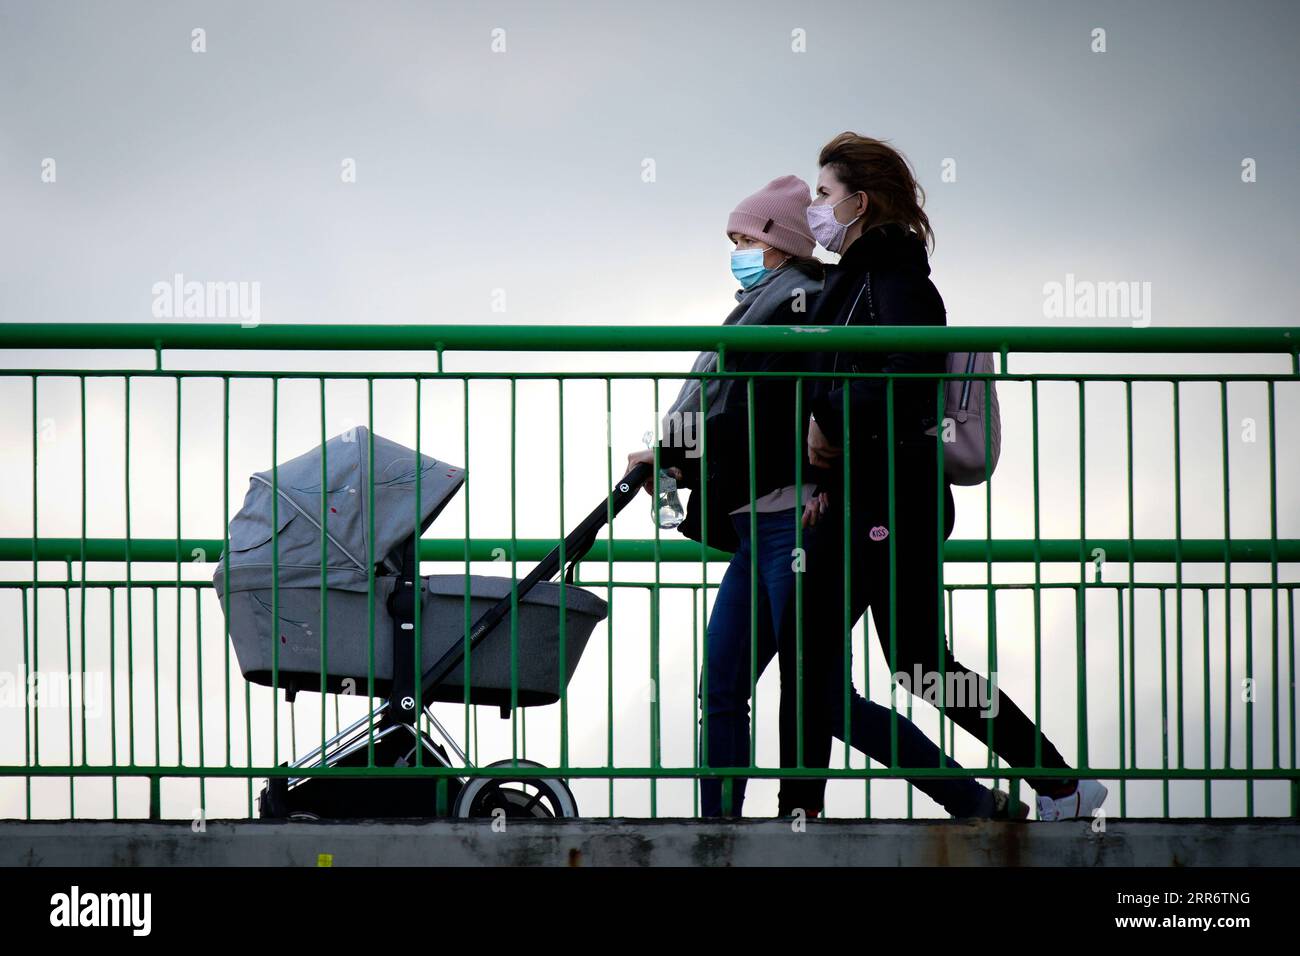 210228 -- WARSAW, Feb. 28, 2021 -- Two women wearing face masks are seen with a stroller crossing a bridge in Warsaw, Poland, on Feb. 27, 2021. The Polish government announced new restrictions on Wednesday in an effort to curb a recent rise in new COVID-19 infections officially dubbed the third wave. Health Minister Adam Niedzielski said that the rules on face covering will be tightened, mandating the use of masks in public spaces starting on Saturday instead of the previously allowed alternatives, such as scarfs and visors. Also starting on Saturday, travelers from southern neighbours Slovaki Stock Photo